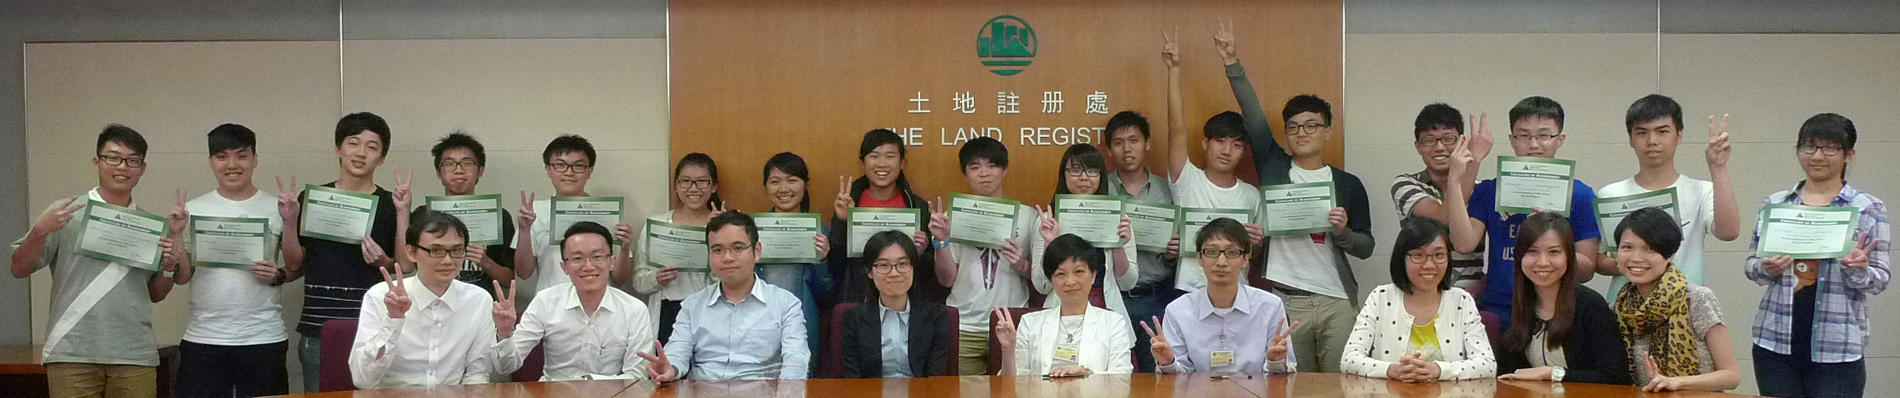 Students from Sha Tin Methodist College and St. Francis Xavier's School, Tsuen Wan joined the event with our mentors